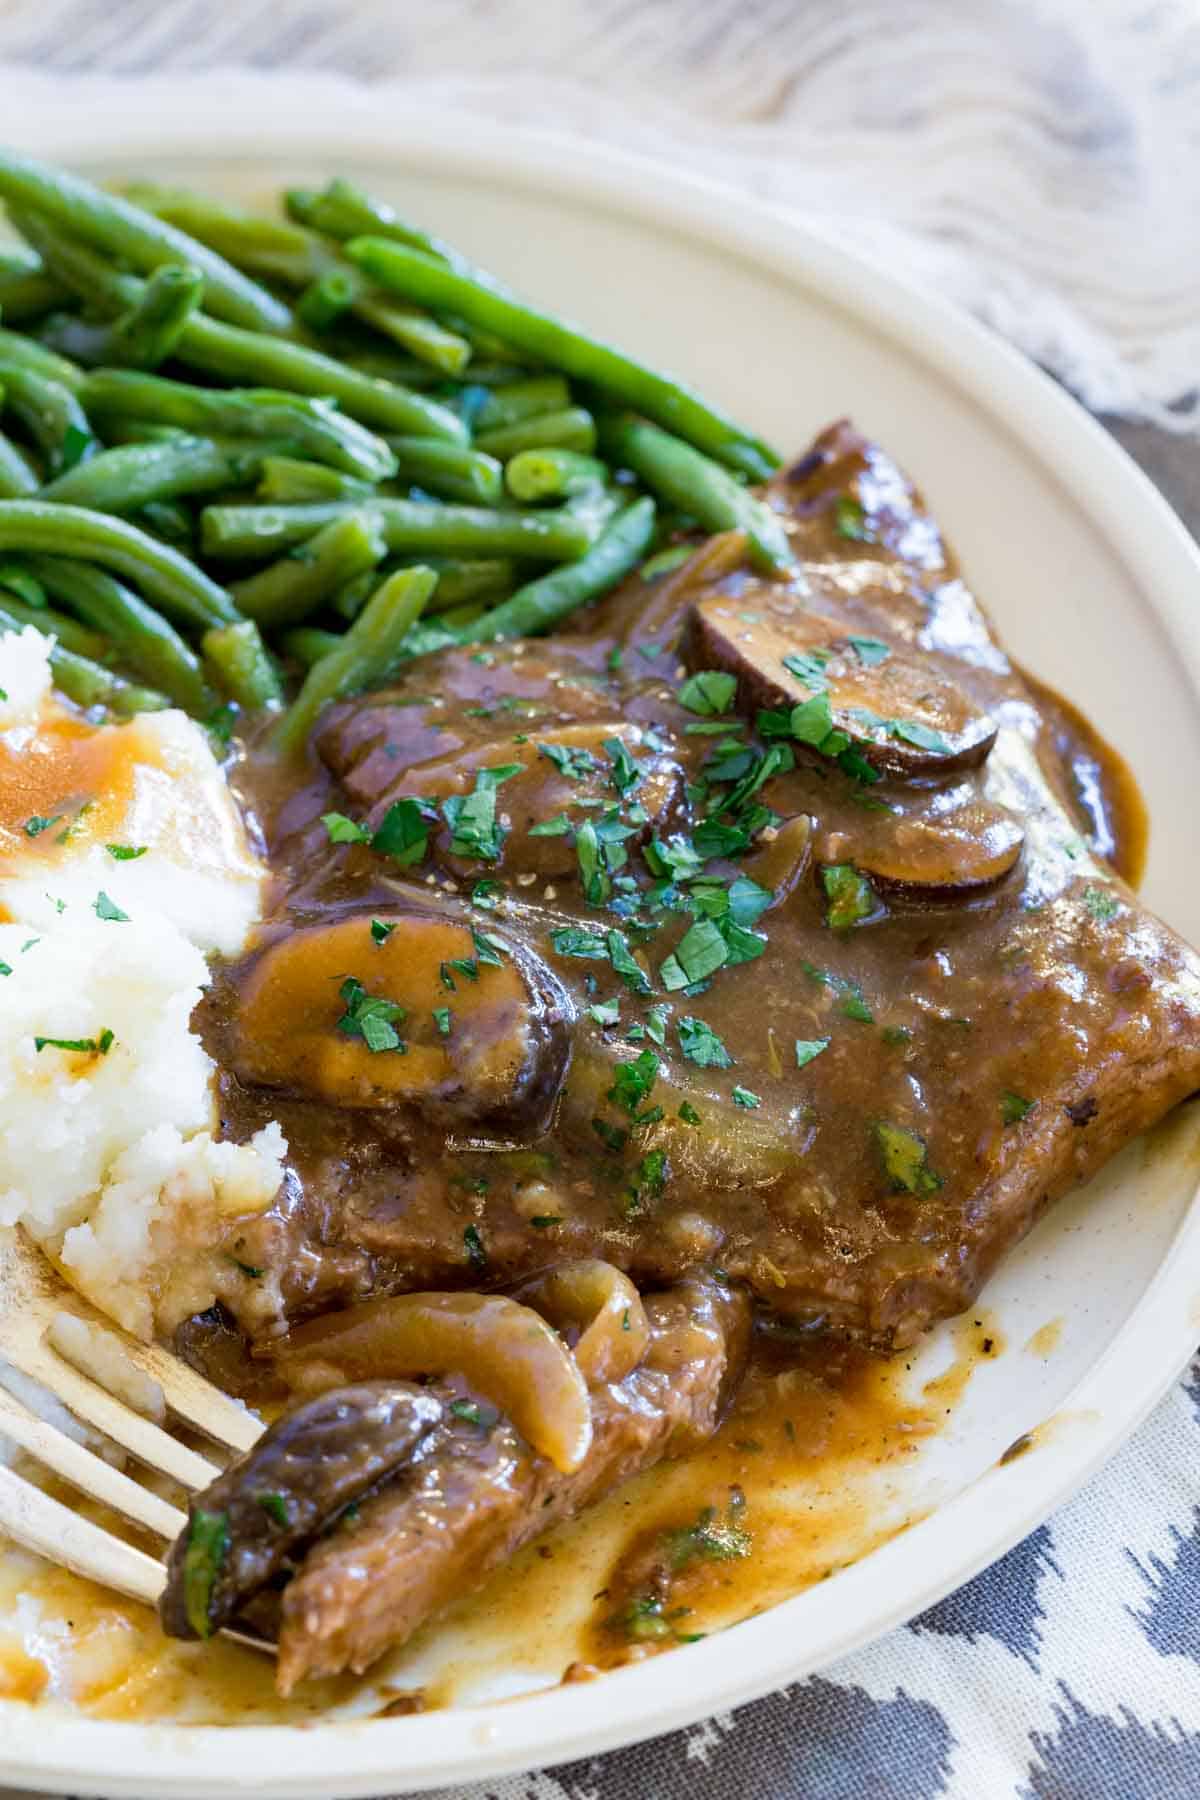 Gluten-free cube steak with gravy topped with mushrooms and onions on a plate next to mashed potatoes and green beans, with a fork.